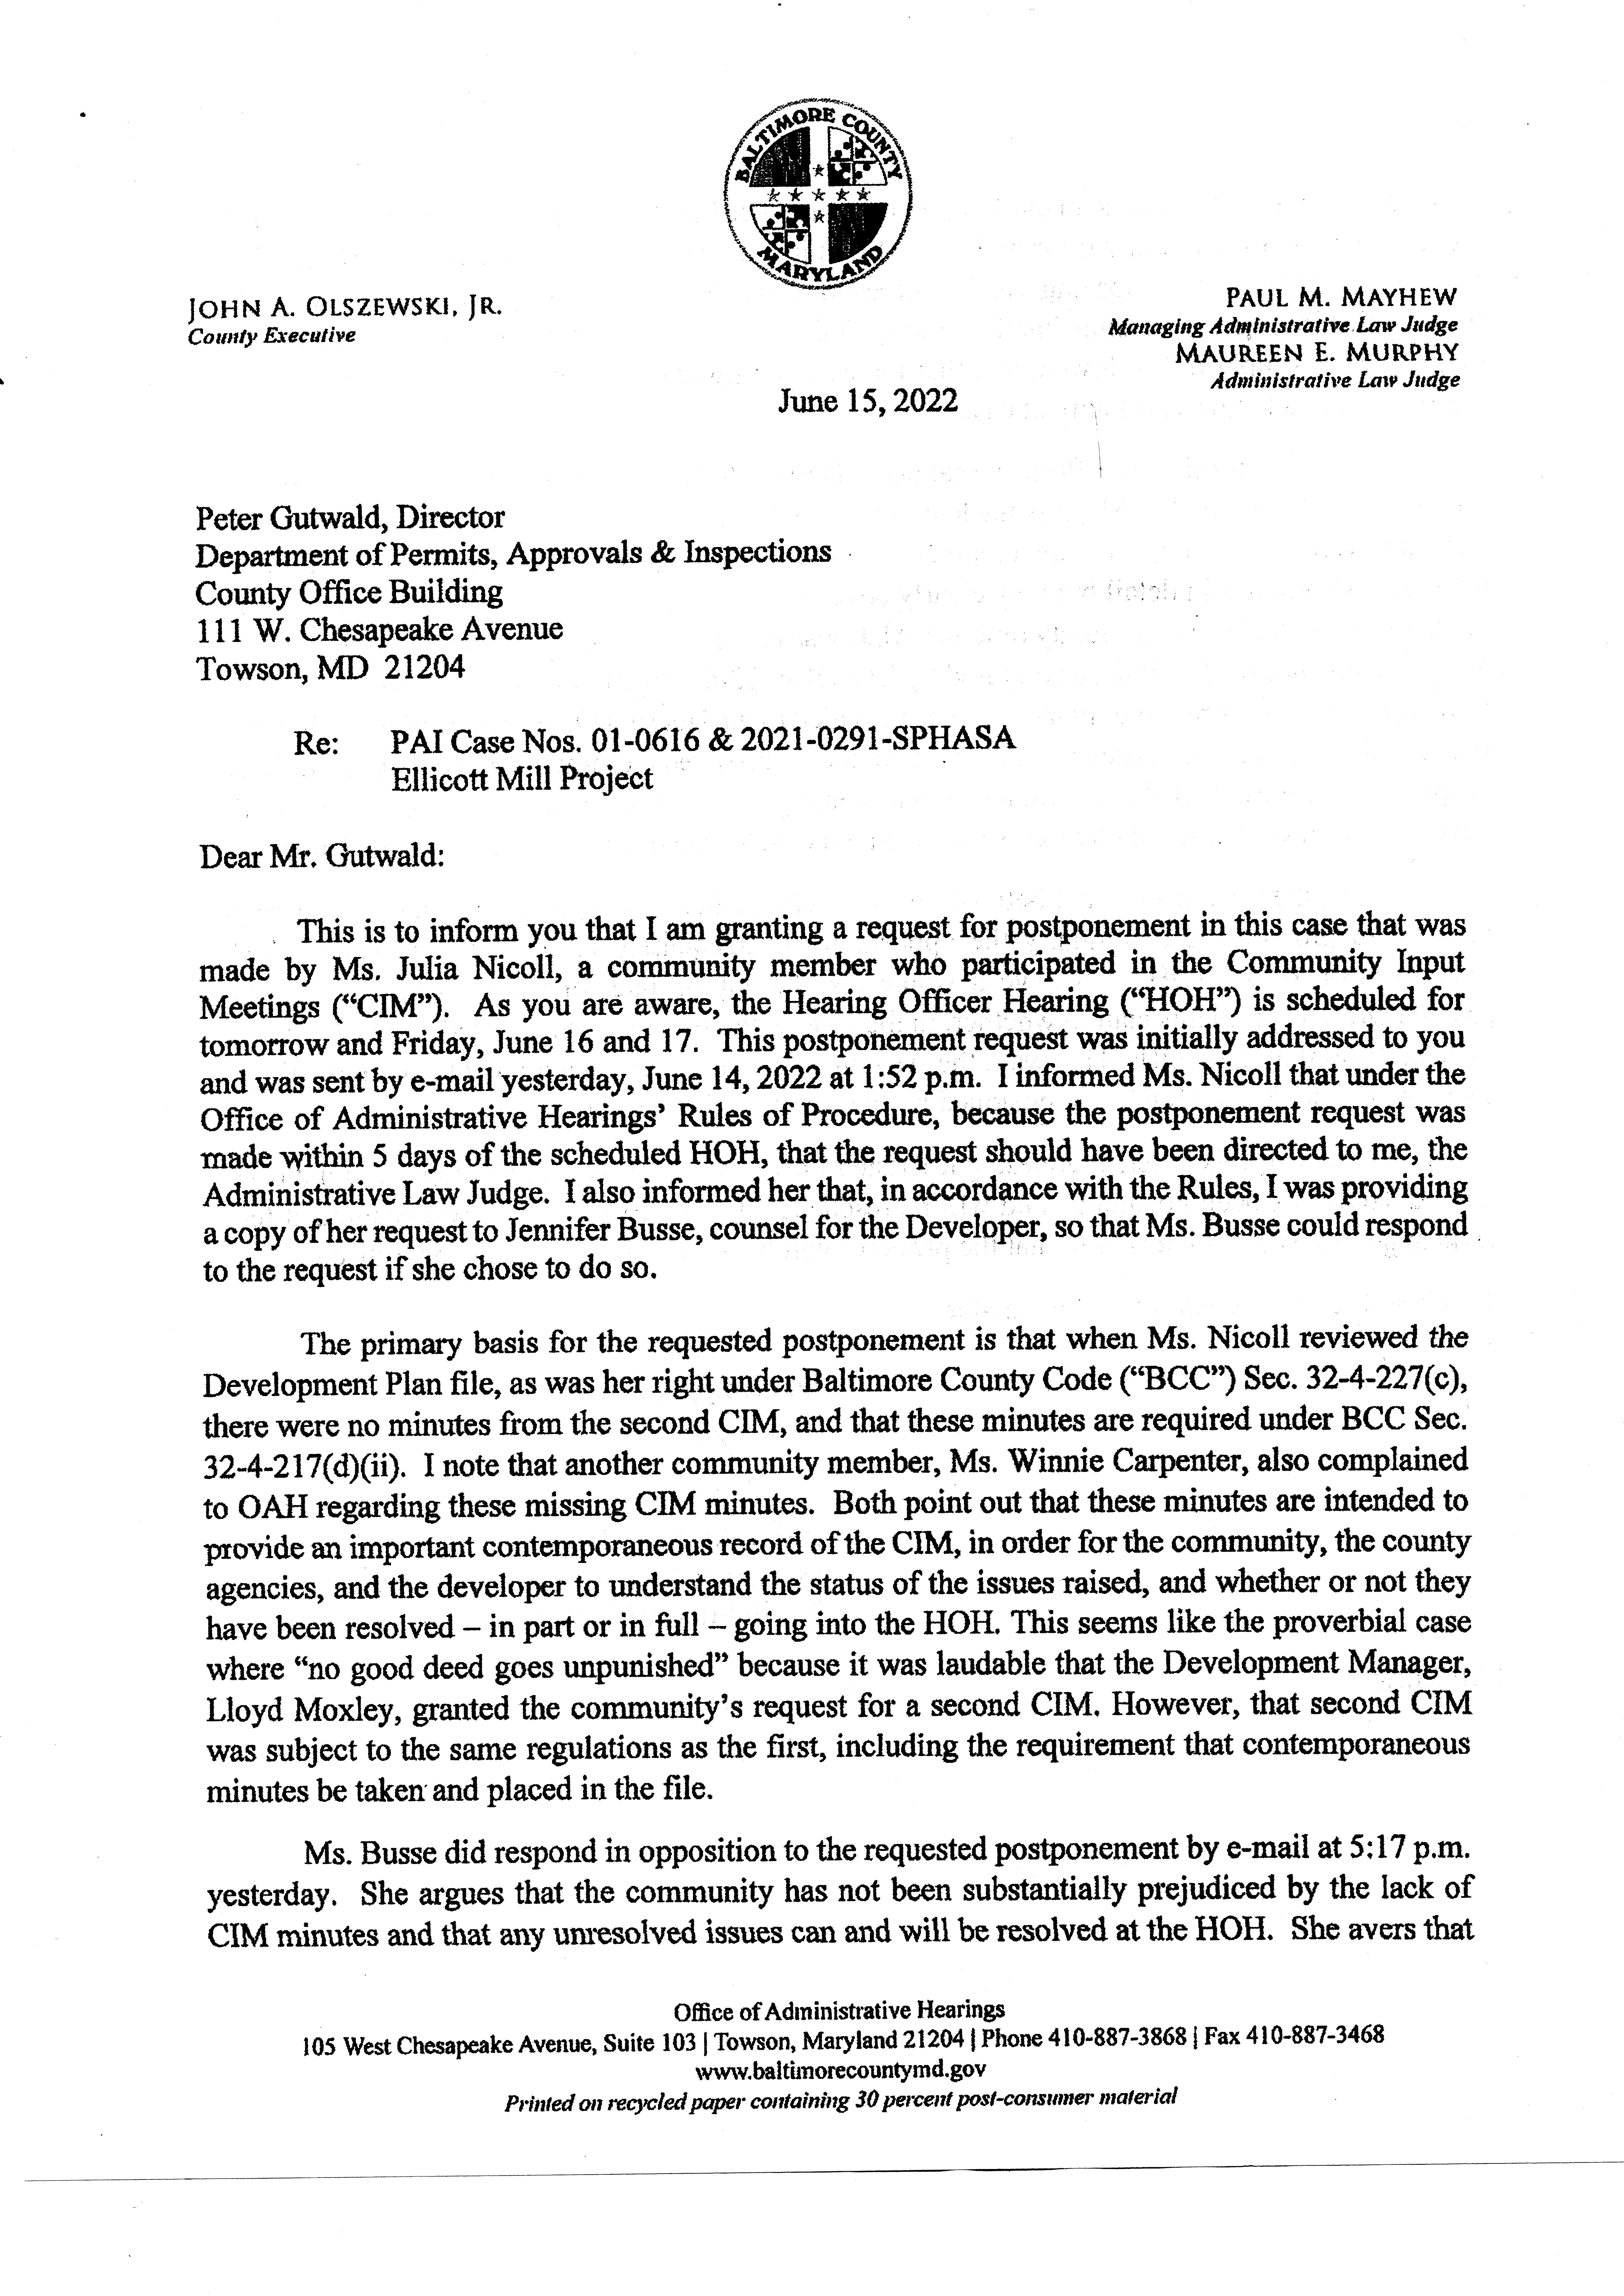 Scan of Letter from Judge Mayhew to Peter Gutwald